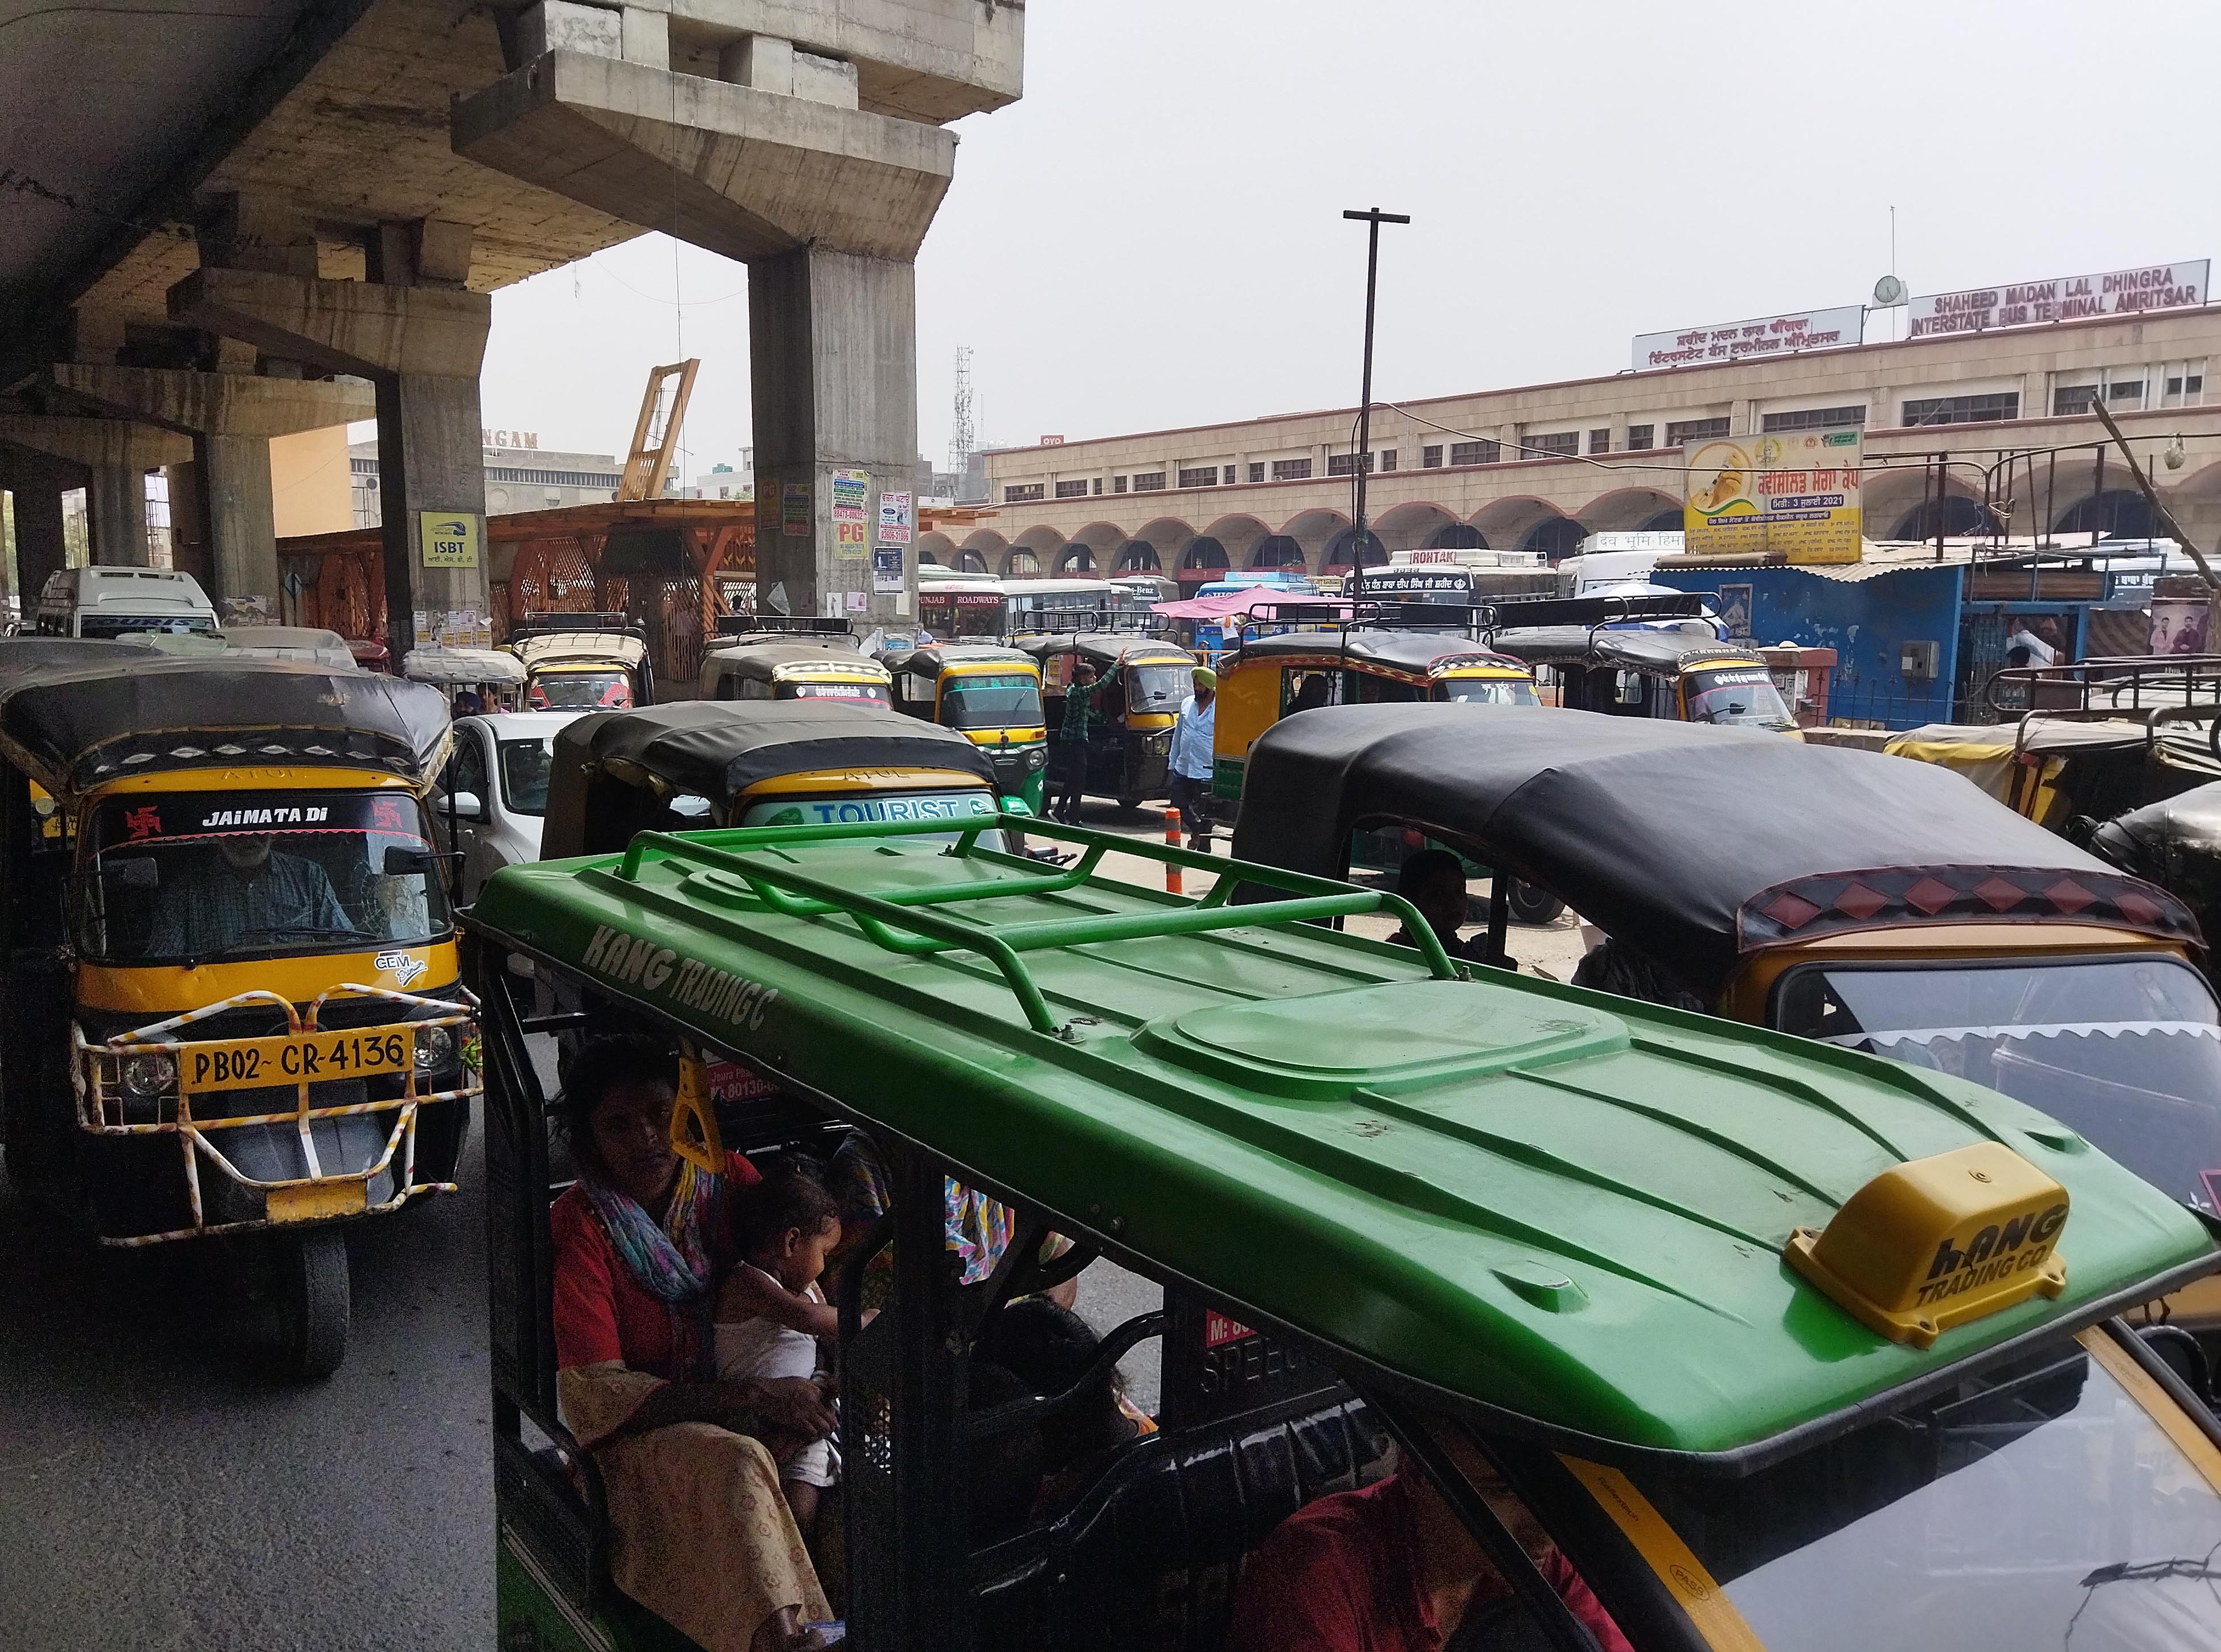 Amirtsar: Bus stand stretch — A test of driving skills & patience